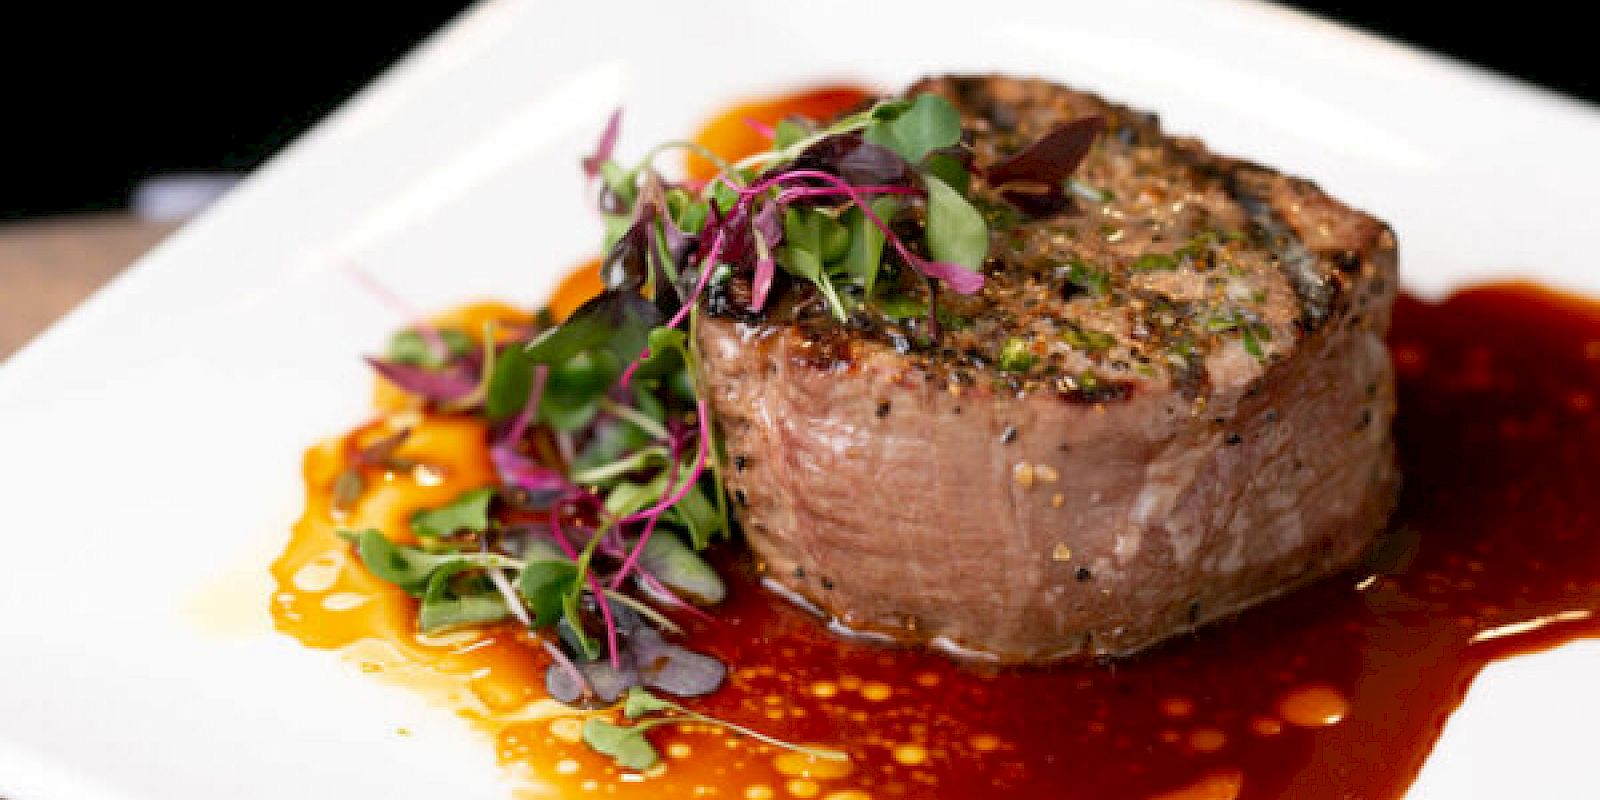 A grilled steak garnished with microgreens, served with sauce on a white plate, ending the sentence.